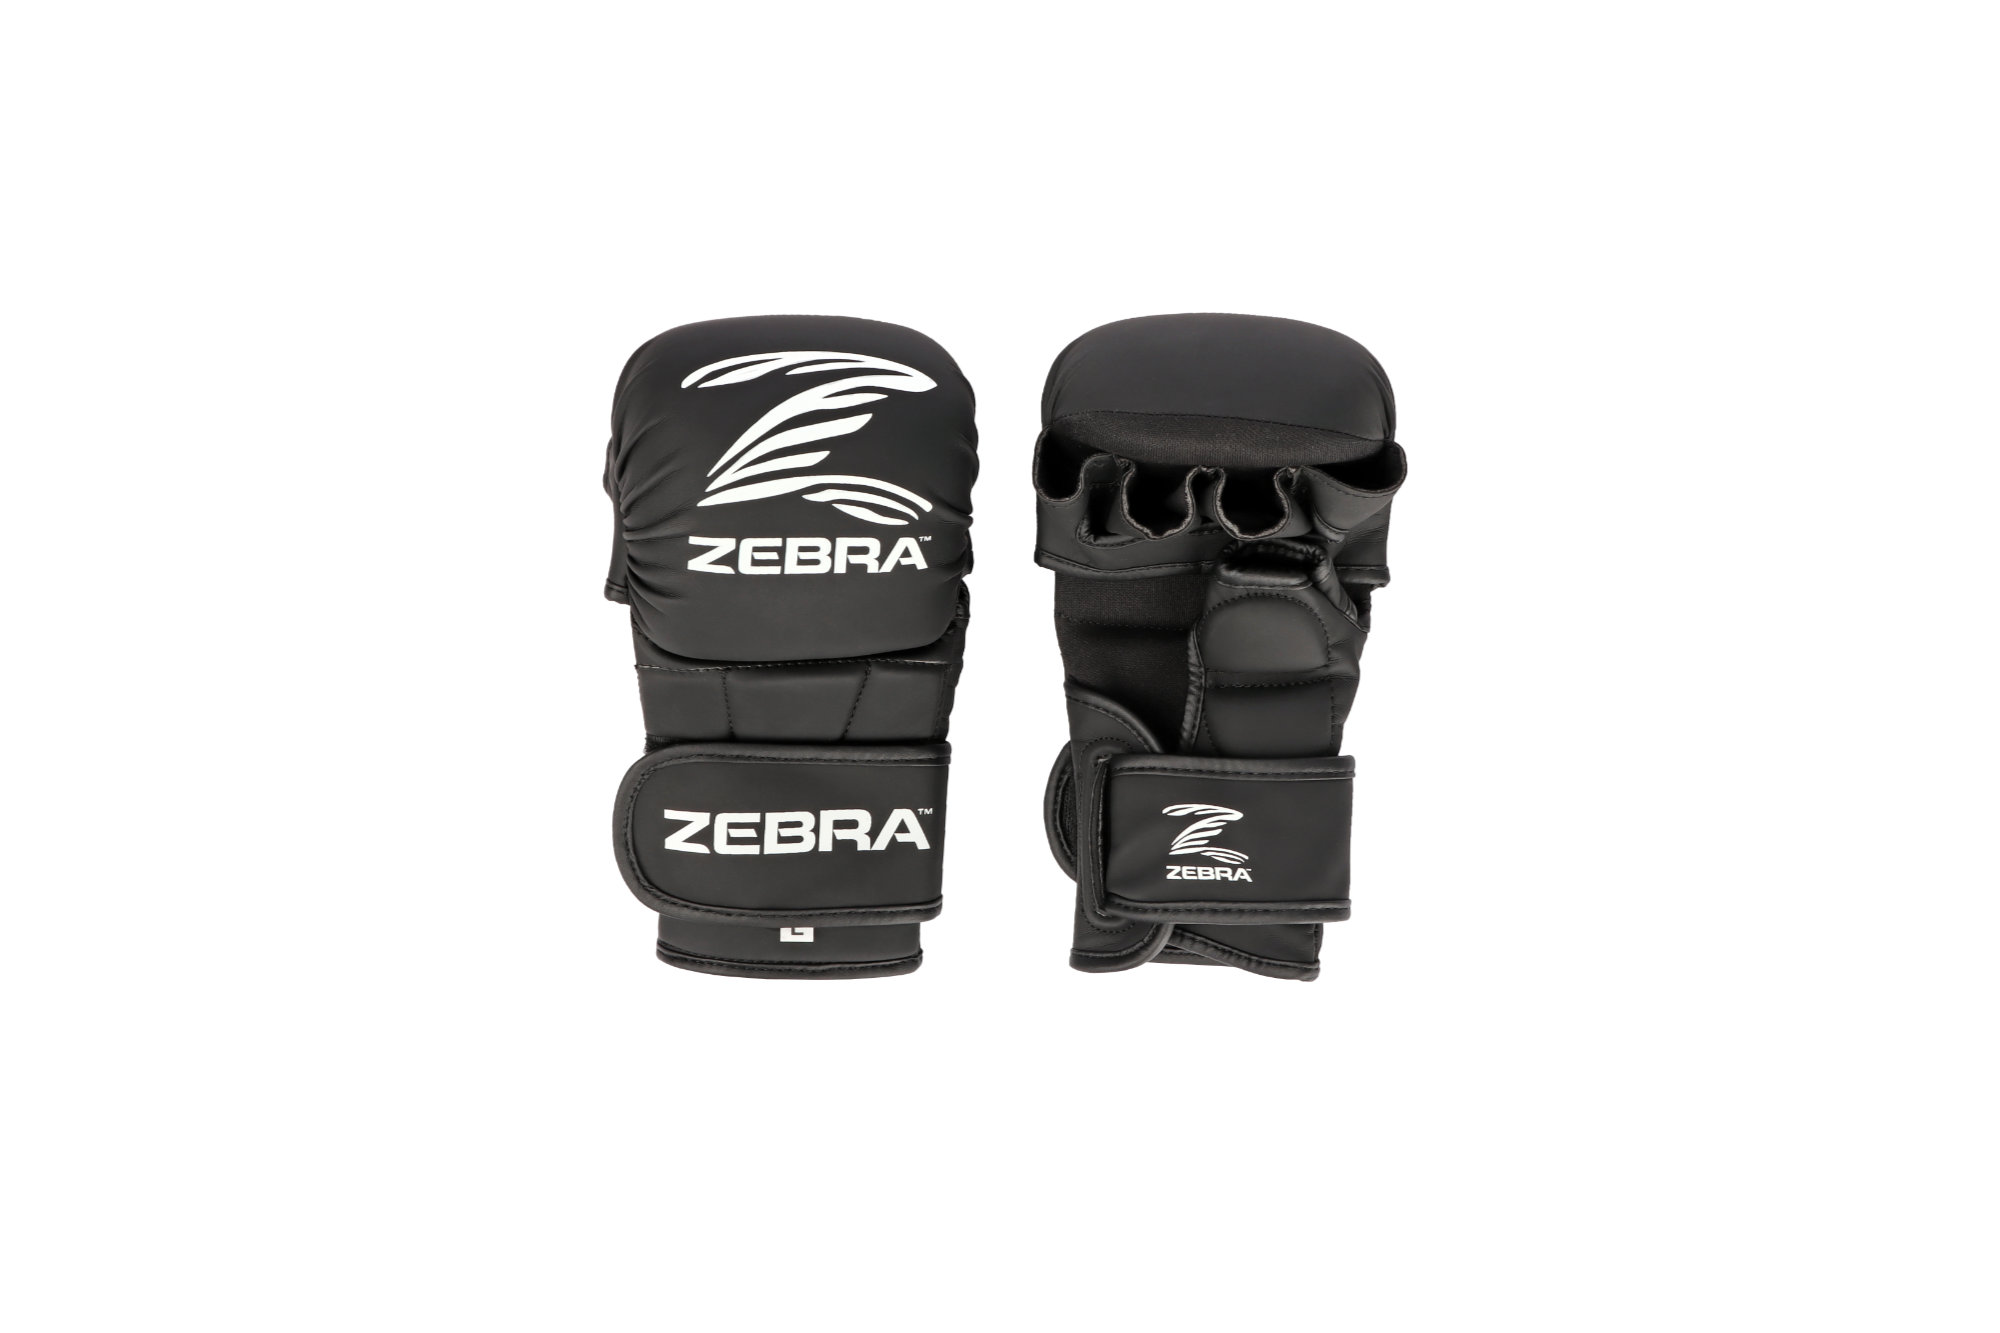 ZEBRA MMA Sparring gloves front and rear view